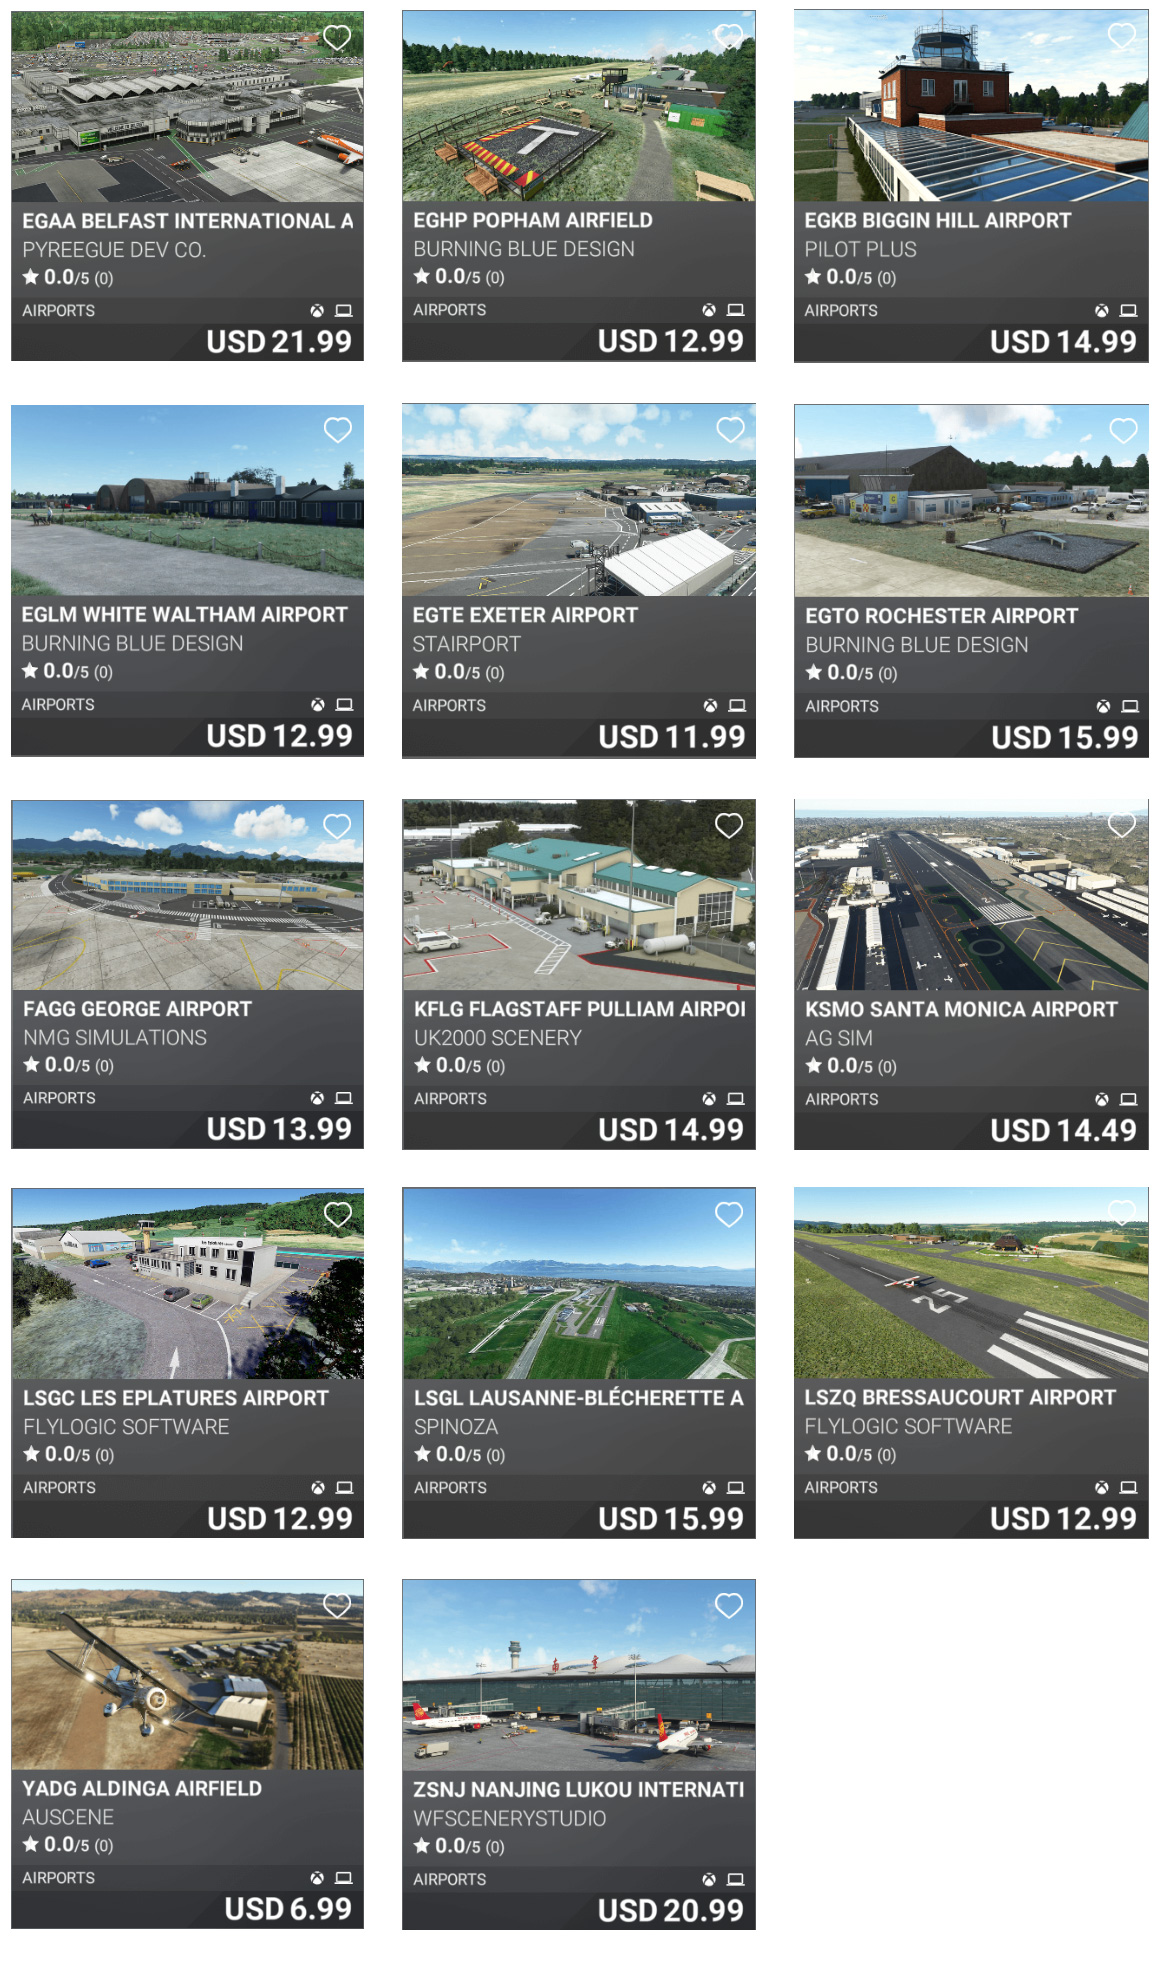 msfs marketplace update aug 25 2022 airports